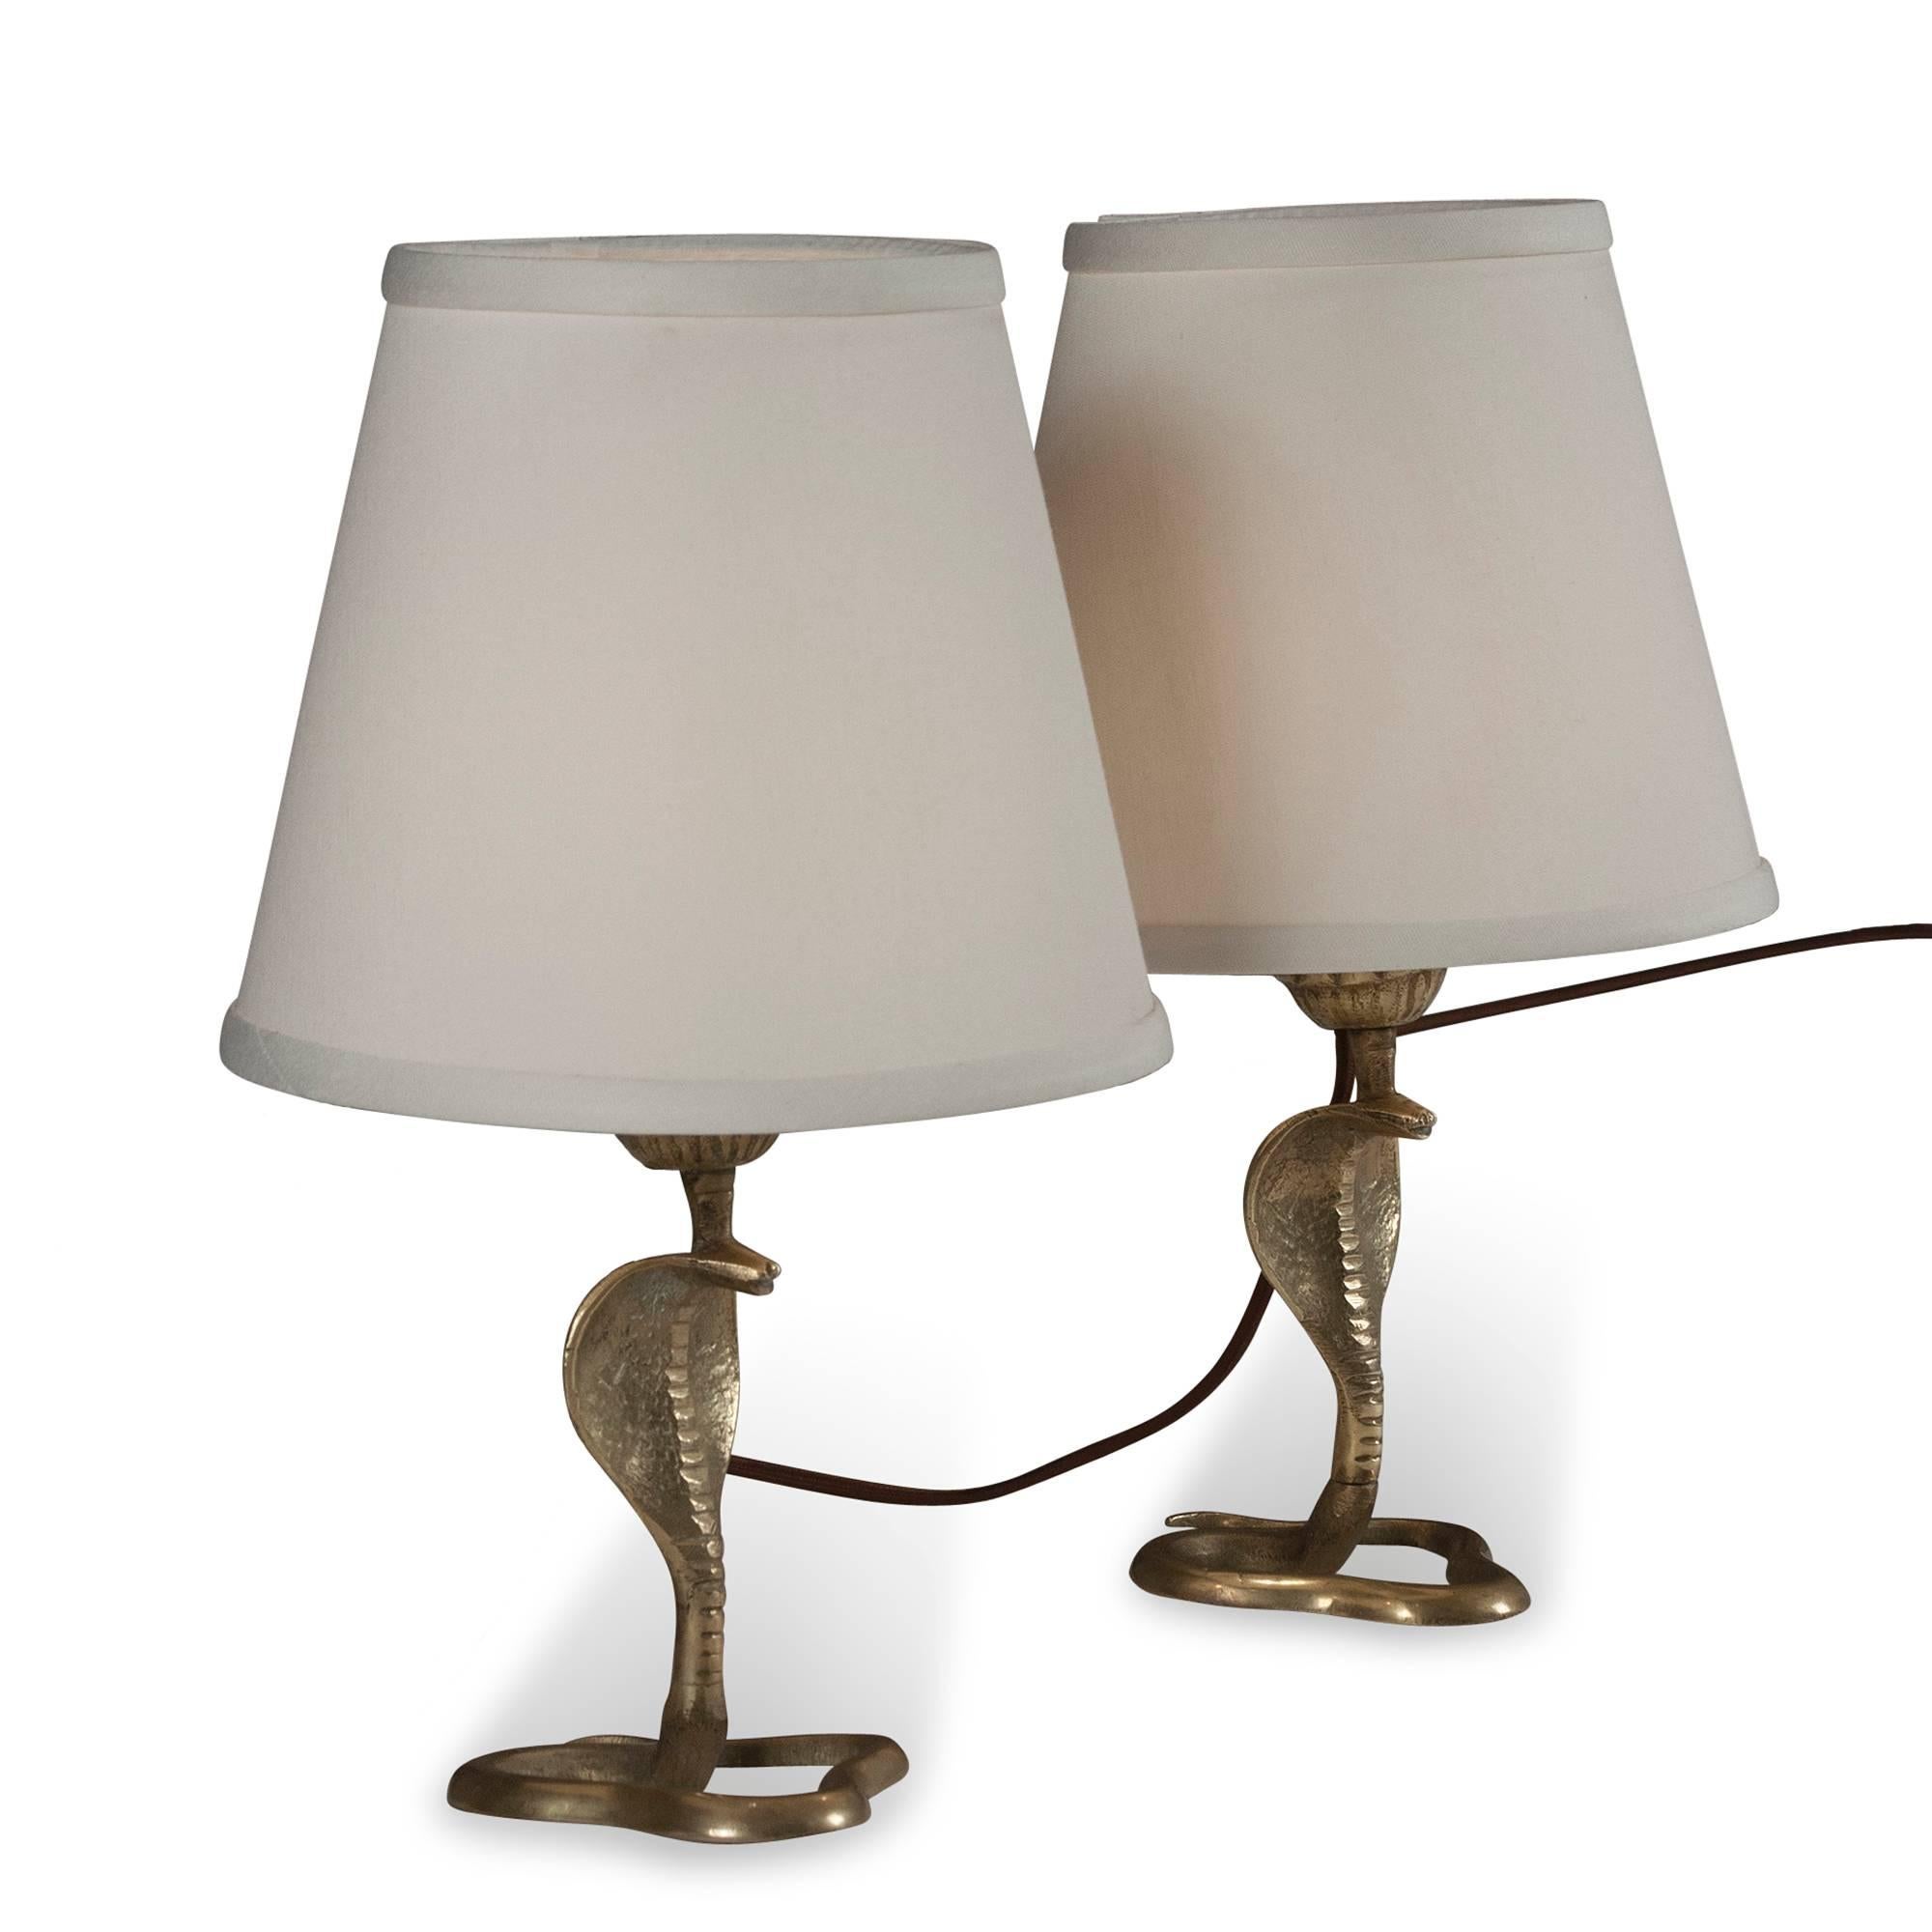 Mid-20th Century Pair of Bronze Cobra Lamps, French, 1930s